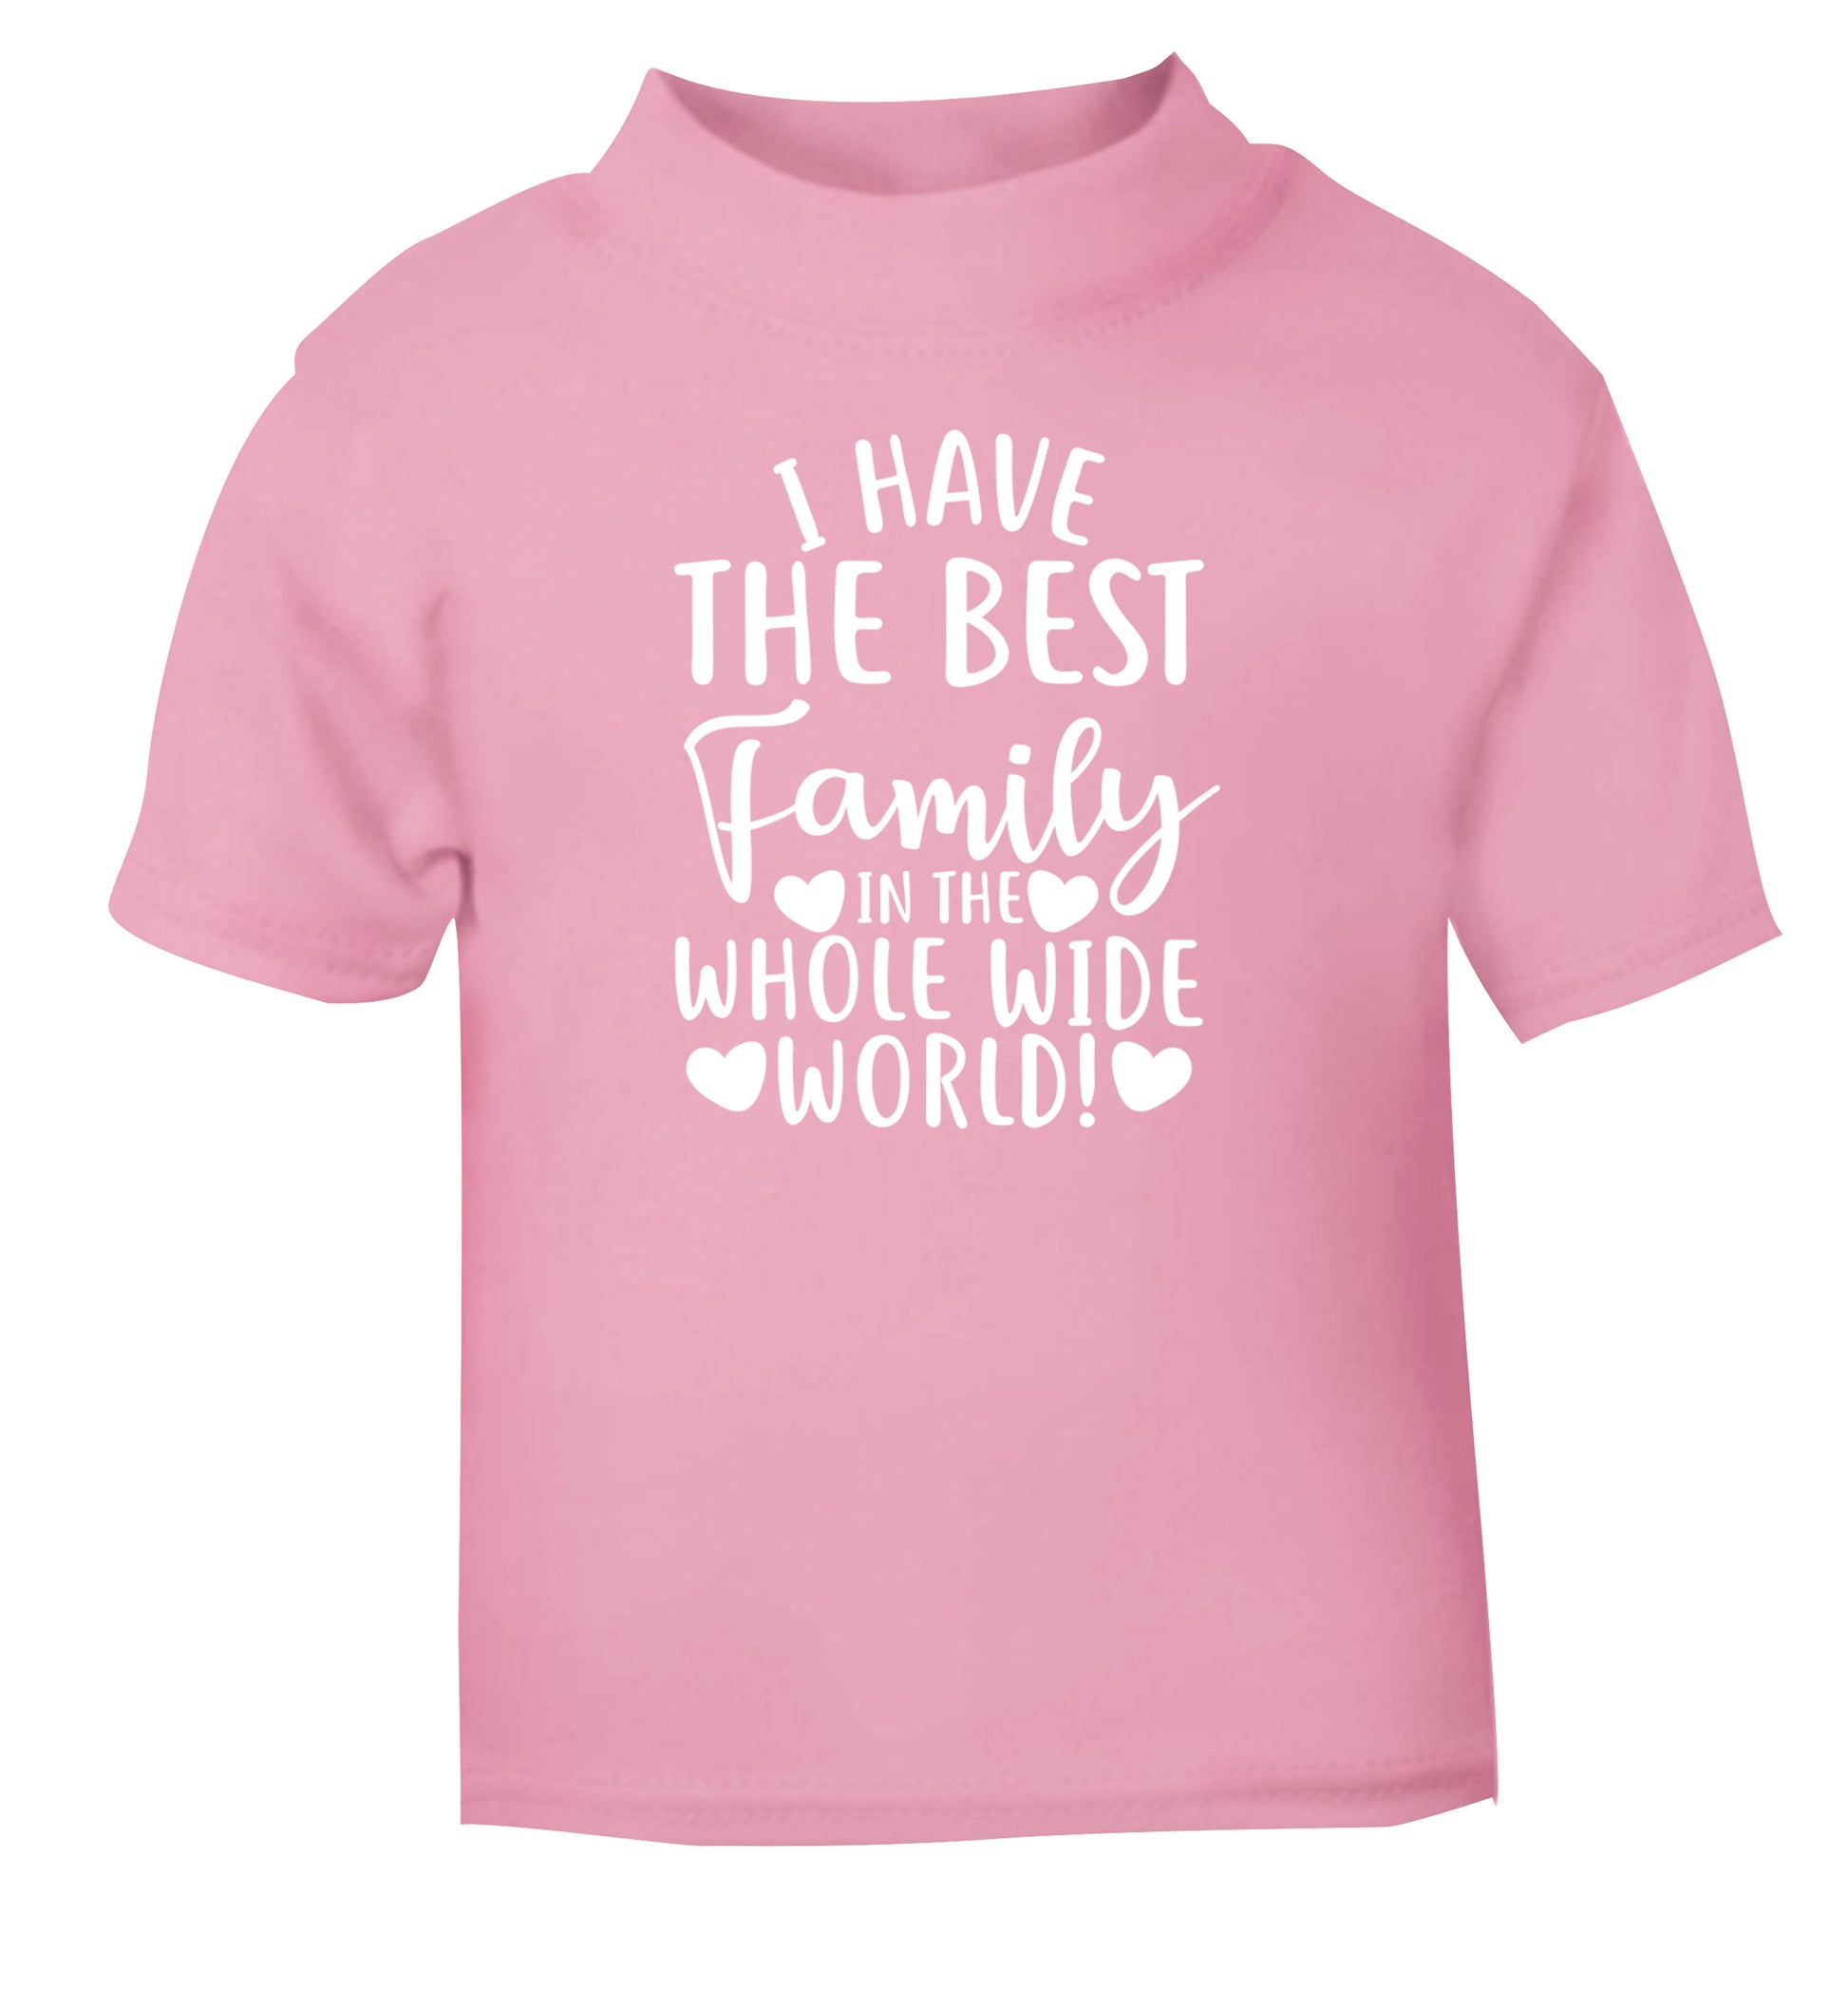 I have the best family in the whole wide world! light pink Baby Toddler Tshirt 2 Years